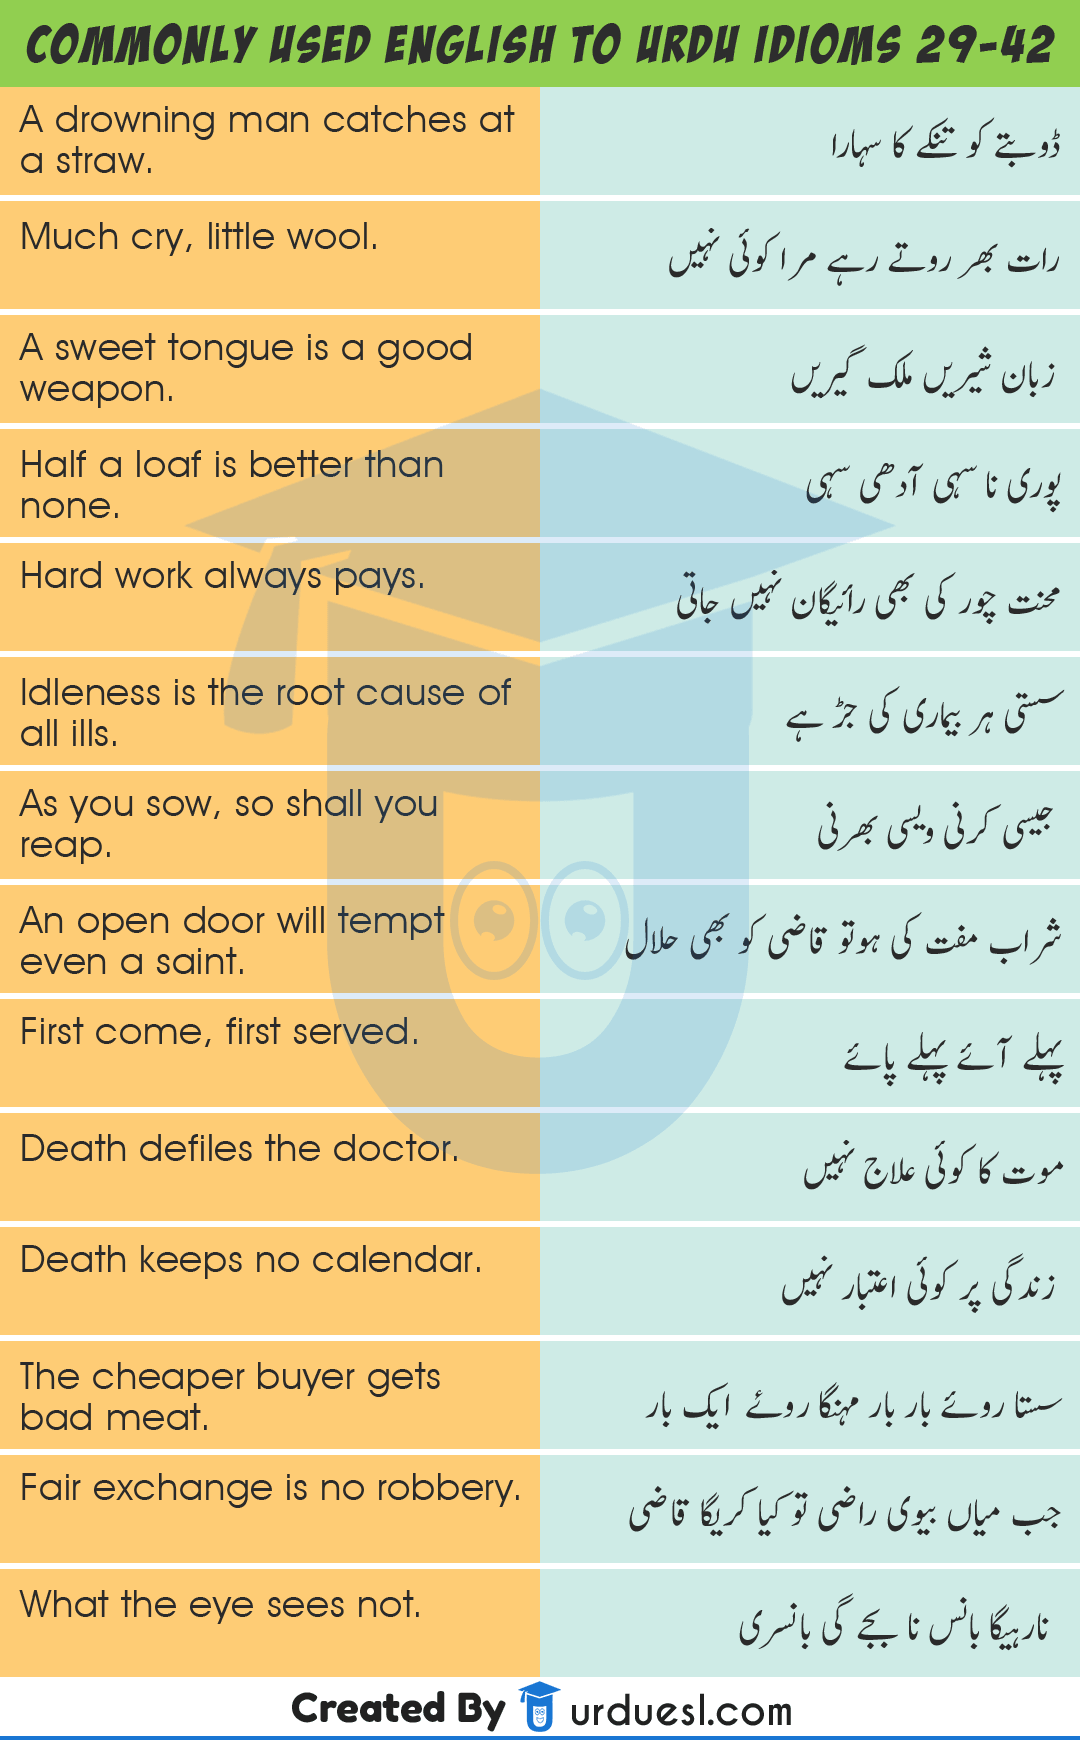 140 Commonly Used English To Urdu Idioms And Proverbs 29 42 